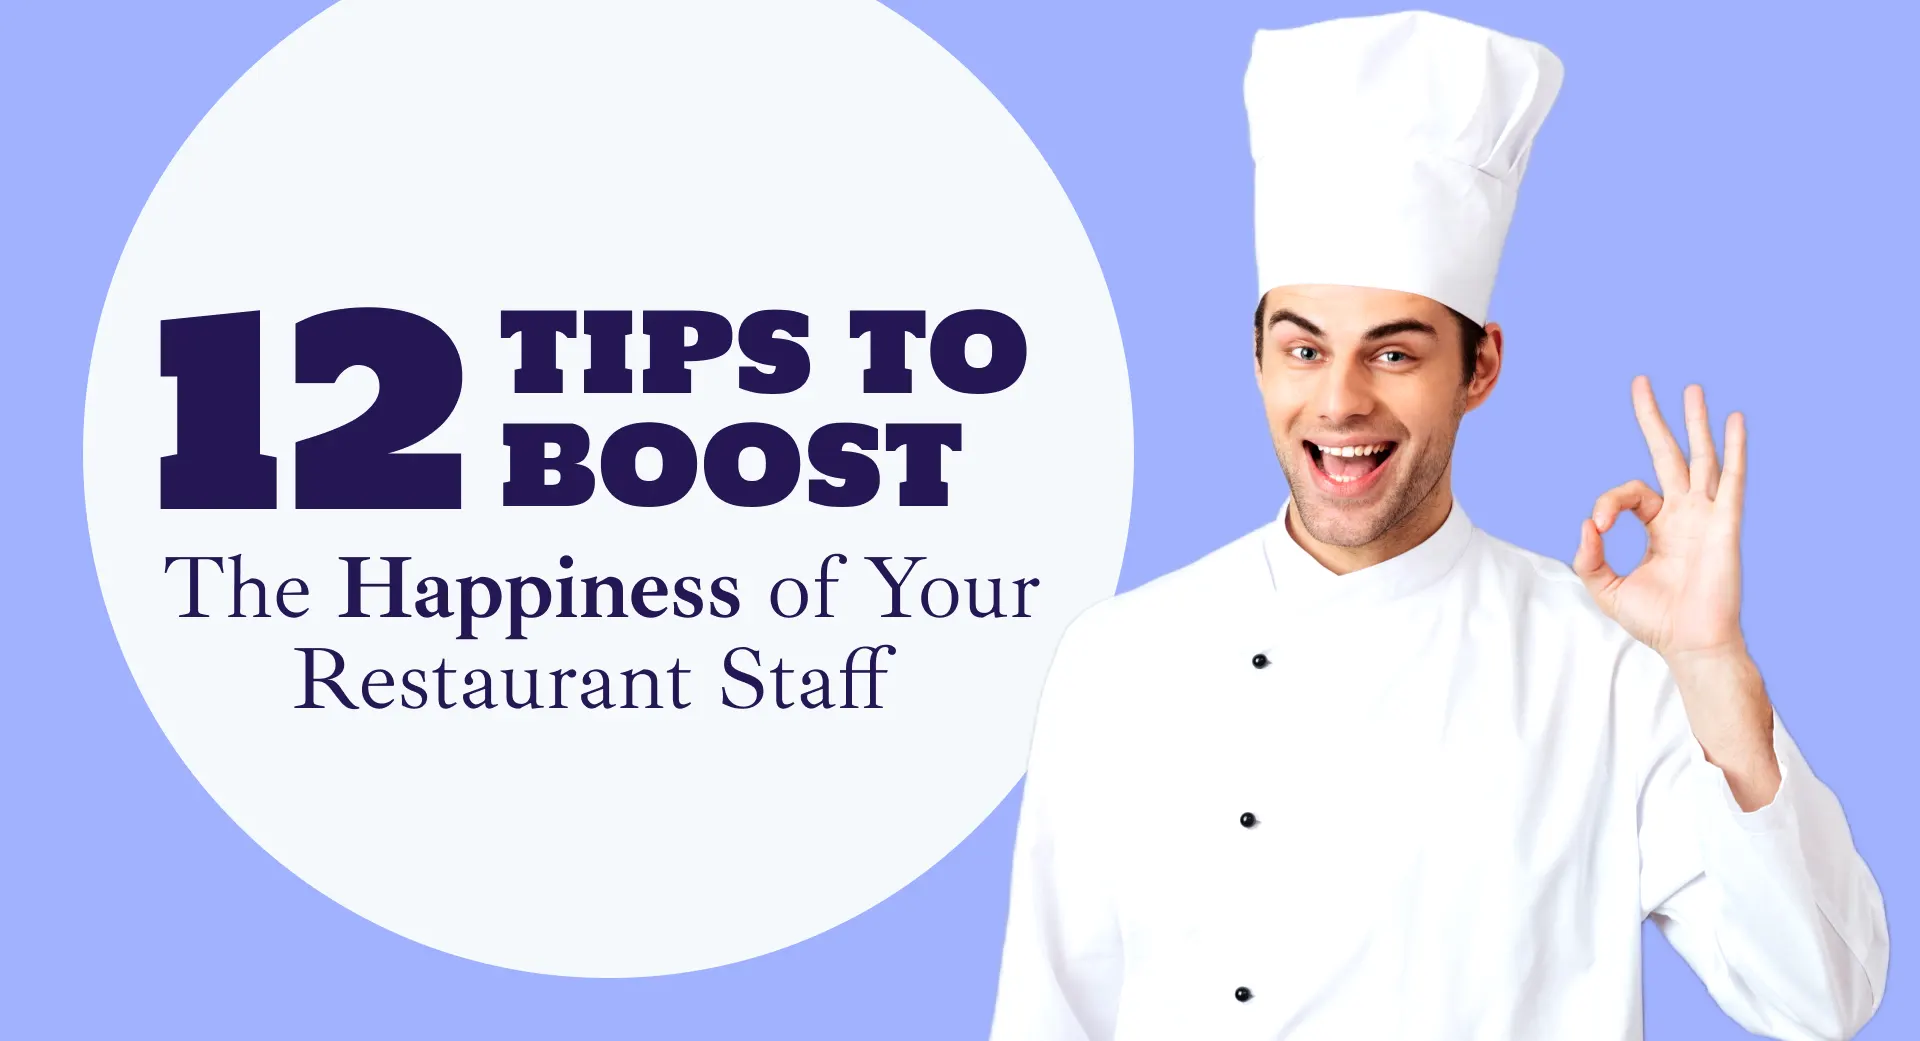 12 Tips to Boost Employee Happiness in Your Restaurant